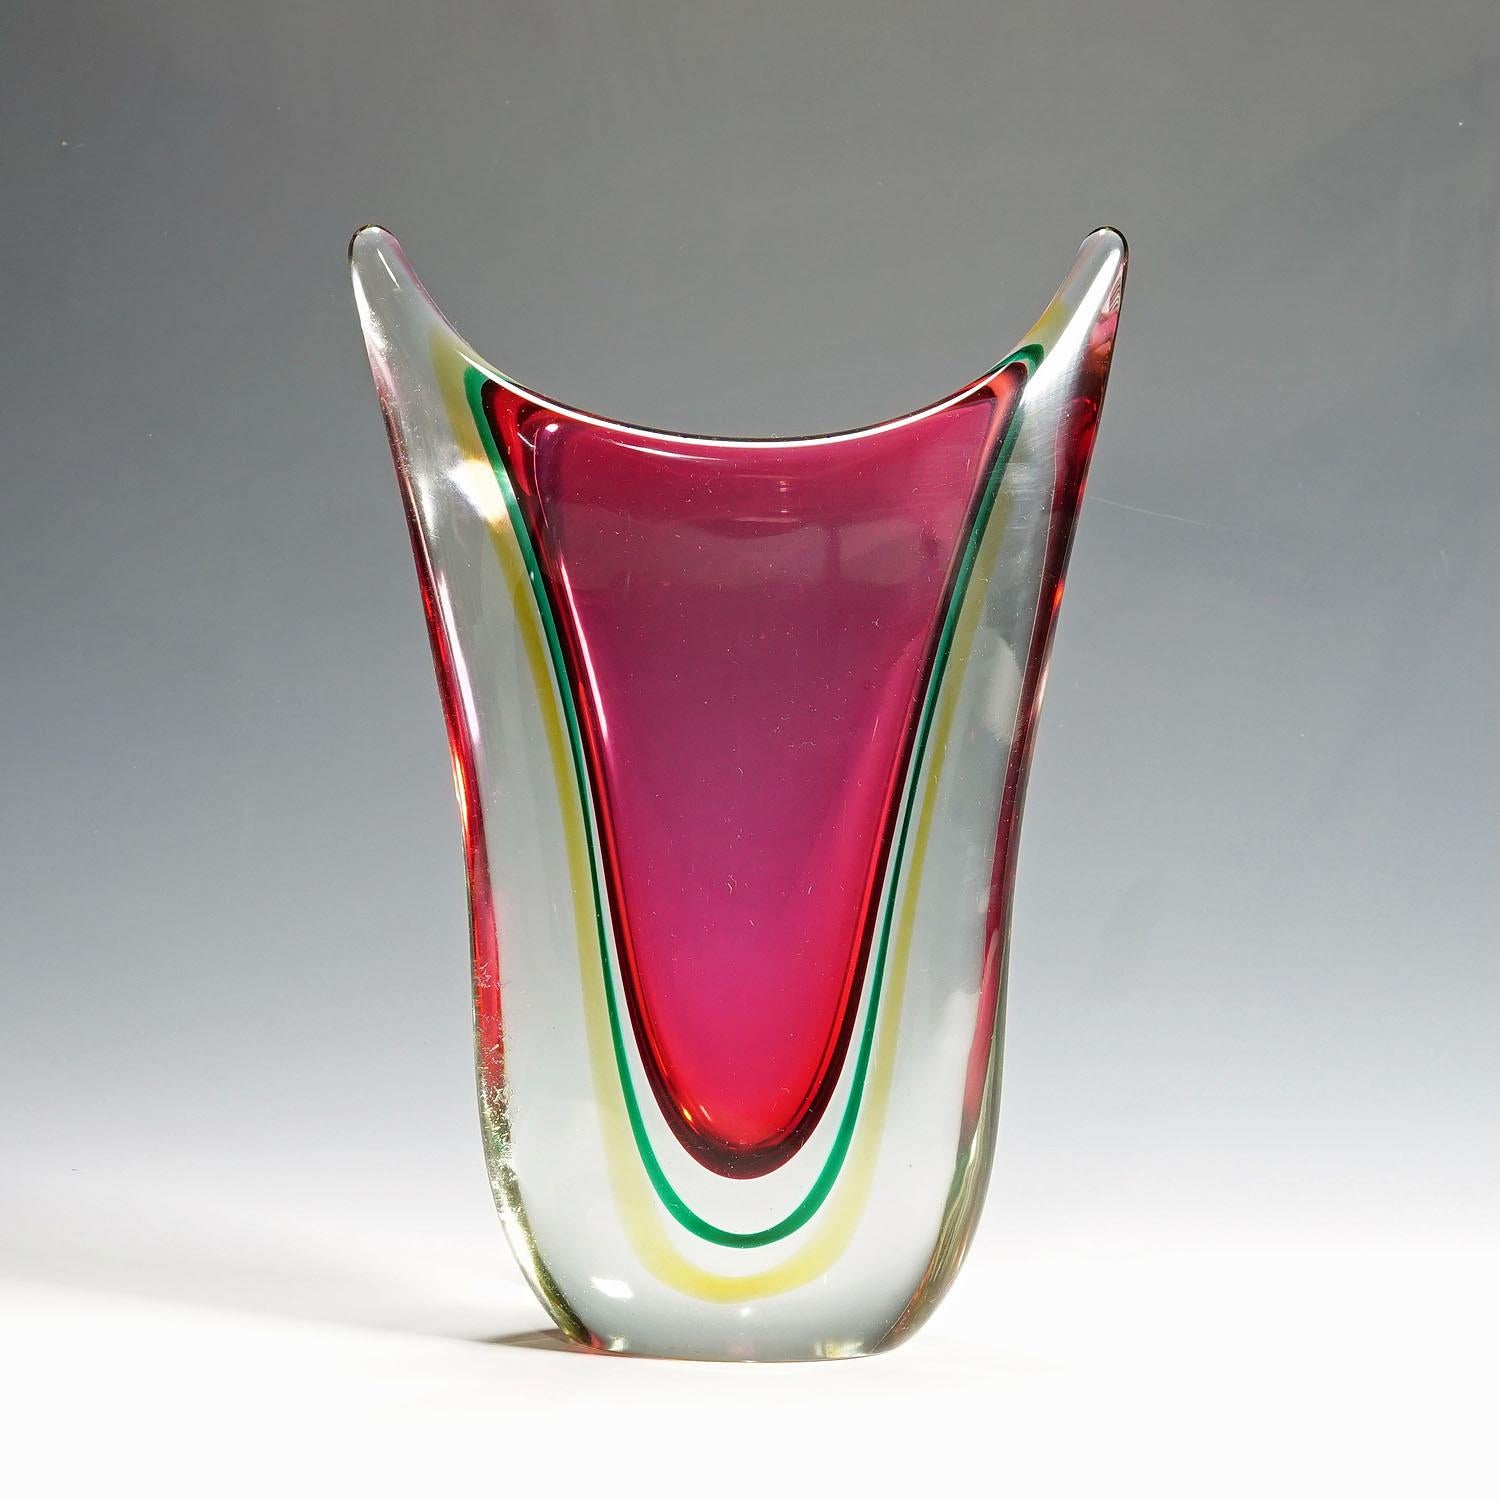 Midcentury Murano sommerso art glass vase by C.O.V.E.M, 1960s

A heavy Murano Sommerso art glass vase manufactured by C.O.V.E.M. (Cooperativa Vetrai Muranesi) circa 1960s. Probably a design of Flavio Poli who worked with C.O.V.E.M. in the 1950s and